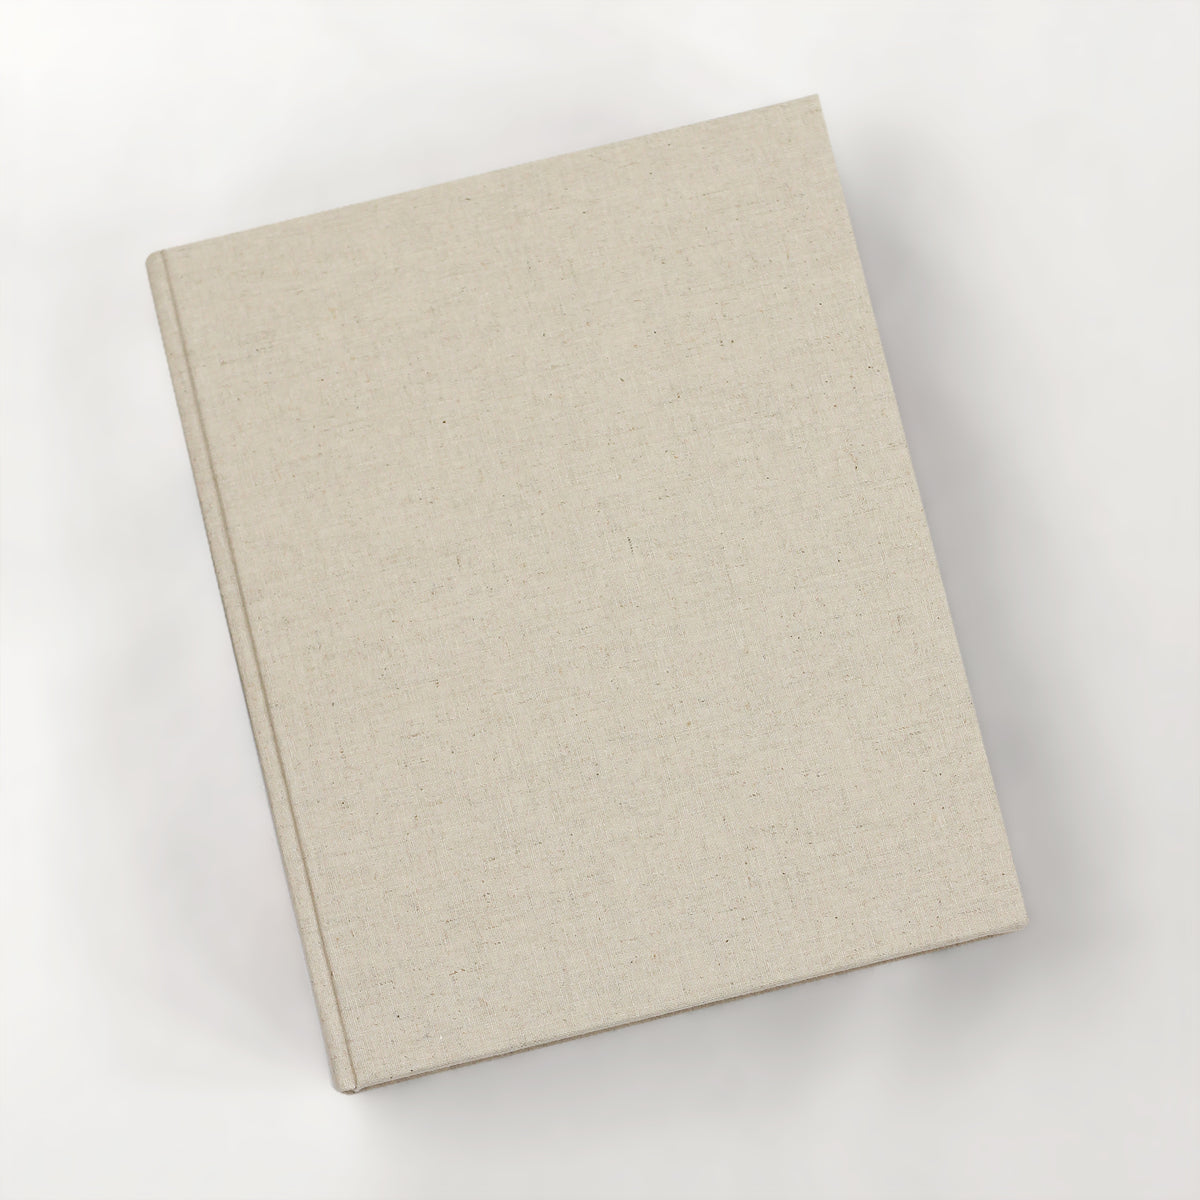 Large 8x10 Blank Page Journal | Cover: Natural Linen | Available Personalized